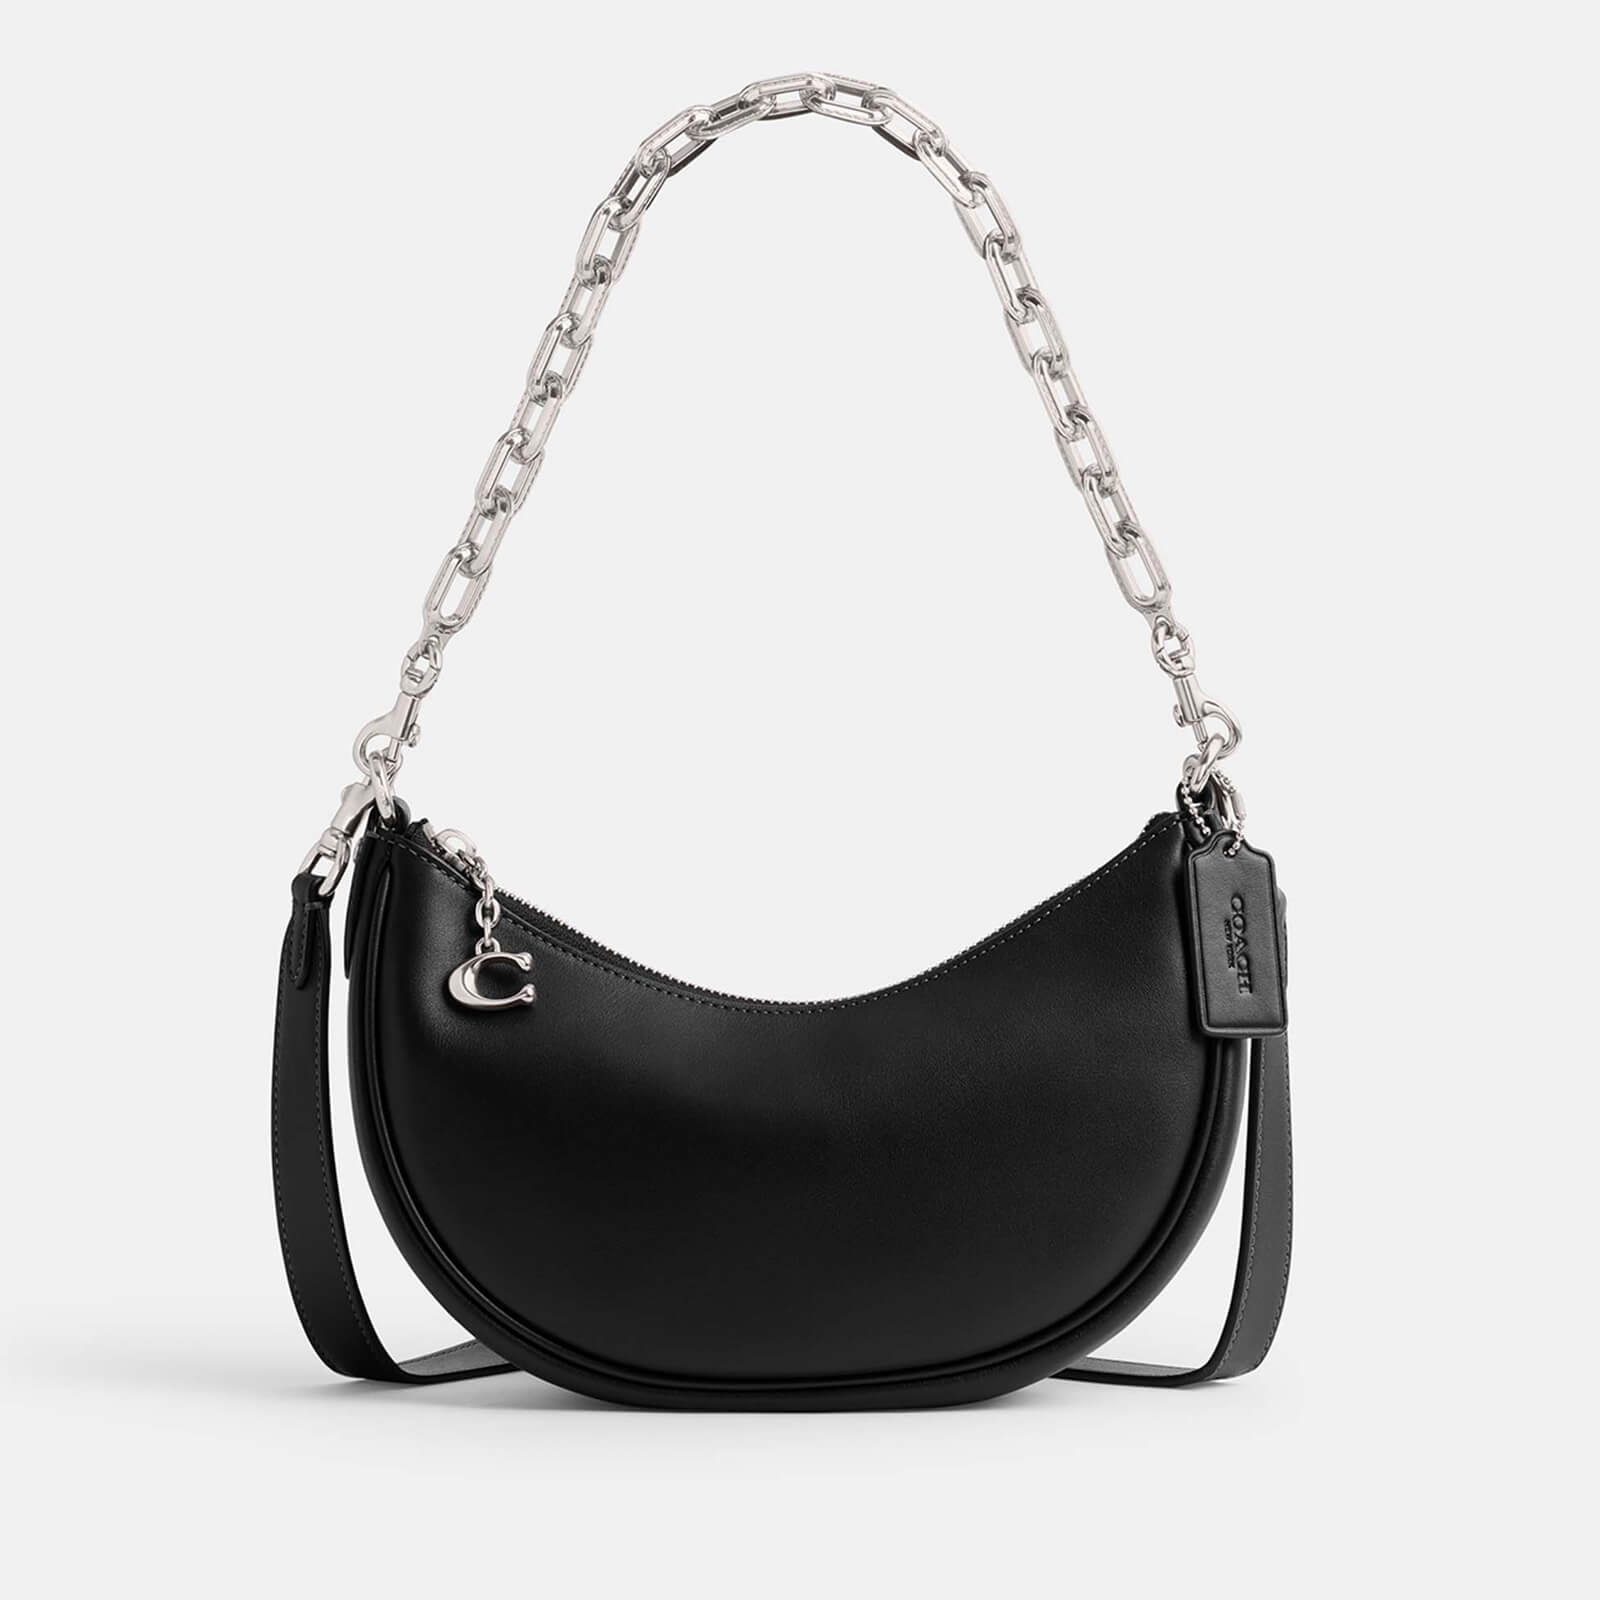 Coach Mira Crescent Glove Tanned Leather Shoulder Bag with Chain - Black